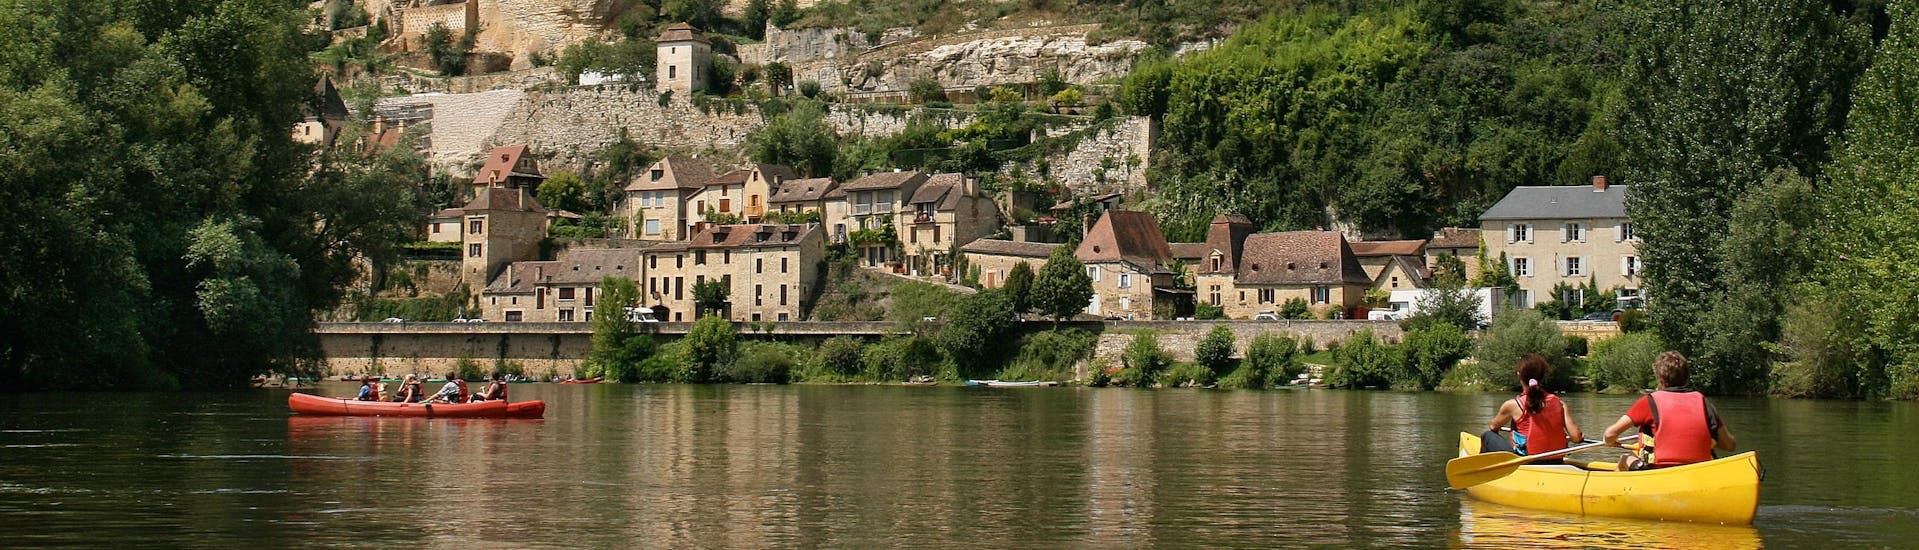 Holidaymakers are taking advantage of their holidays to take a canoe trip on the Dordogne River, and are paddling underneath the Beynac Castle.